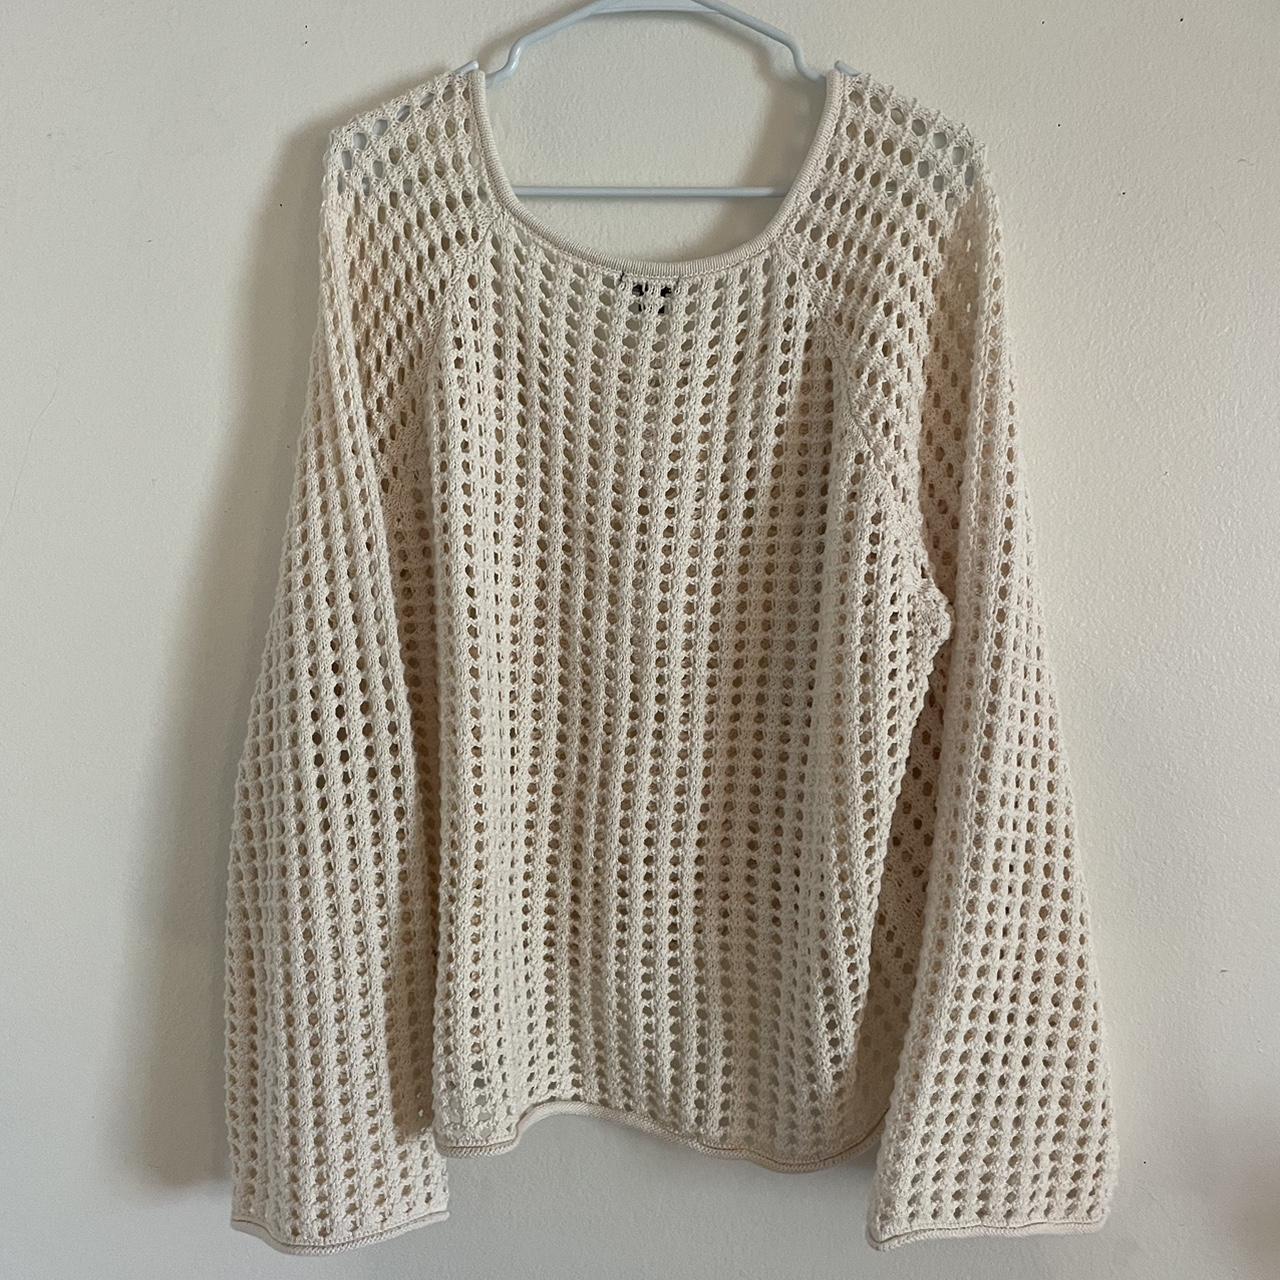 Wide knit wild fable boxy sweater Great coverup... - Depop